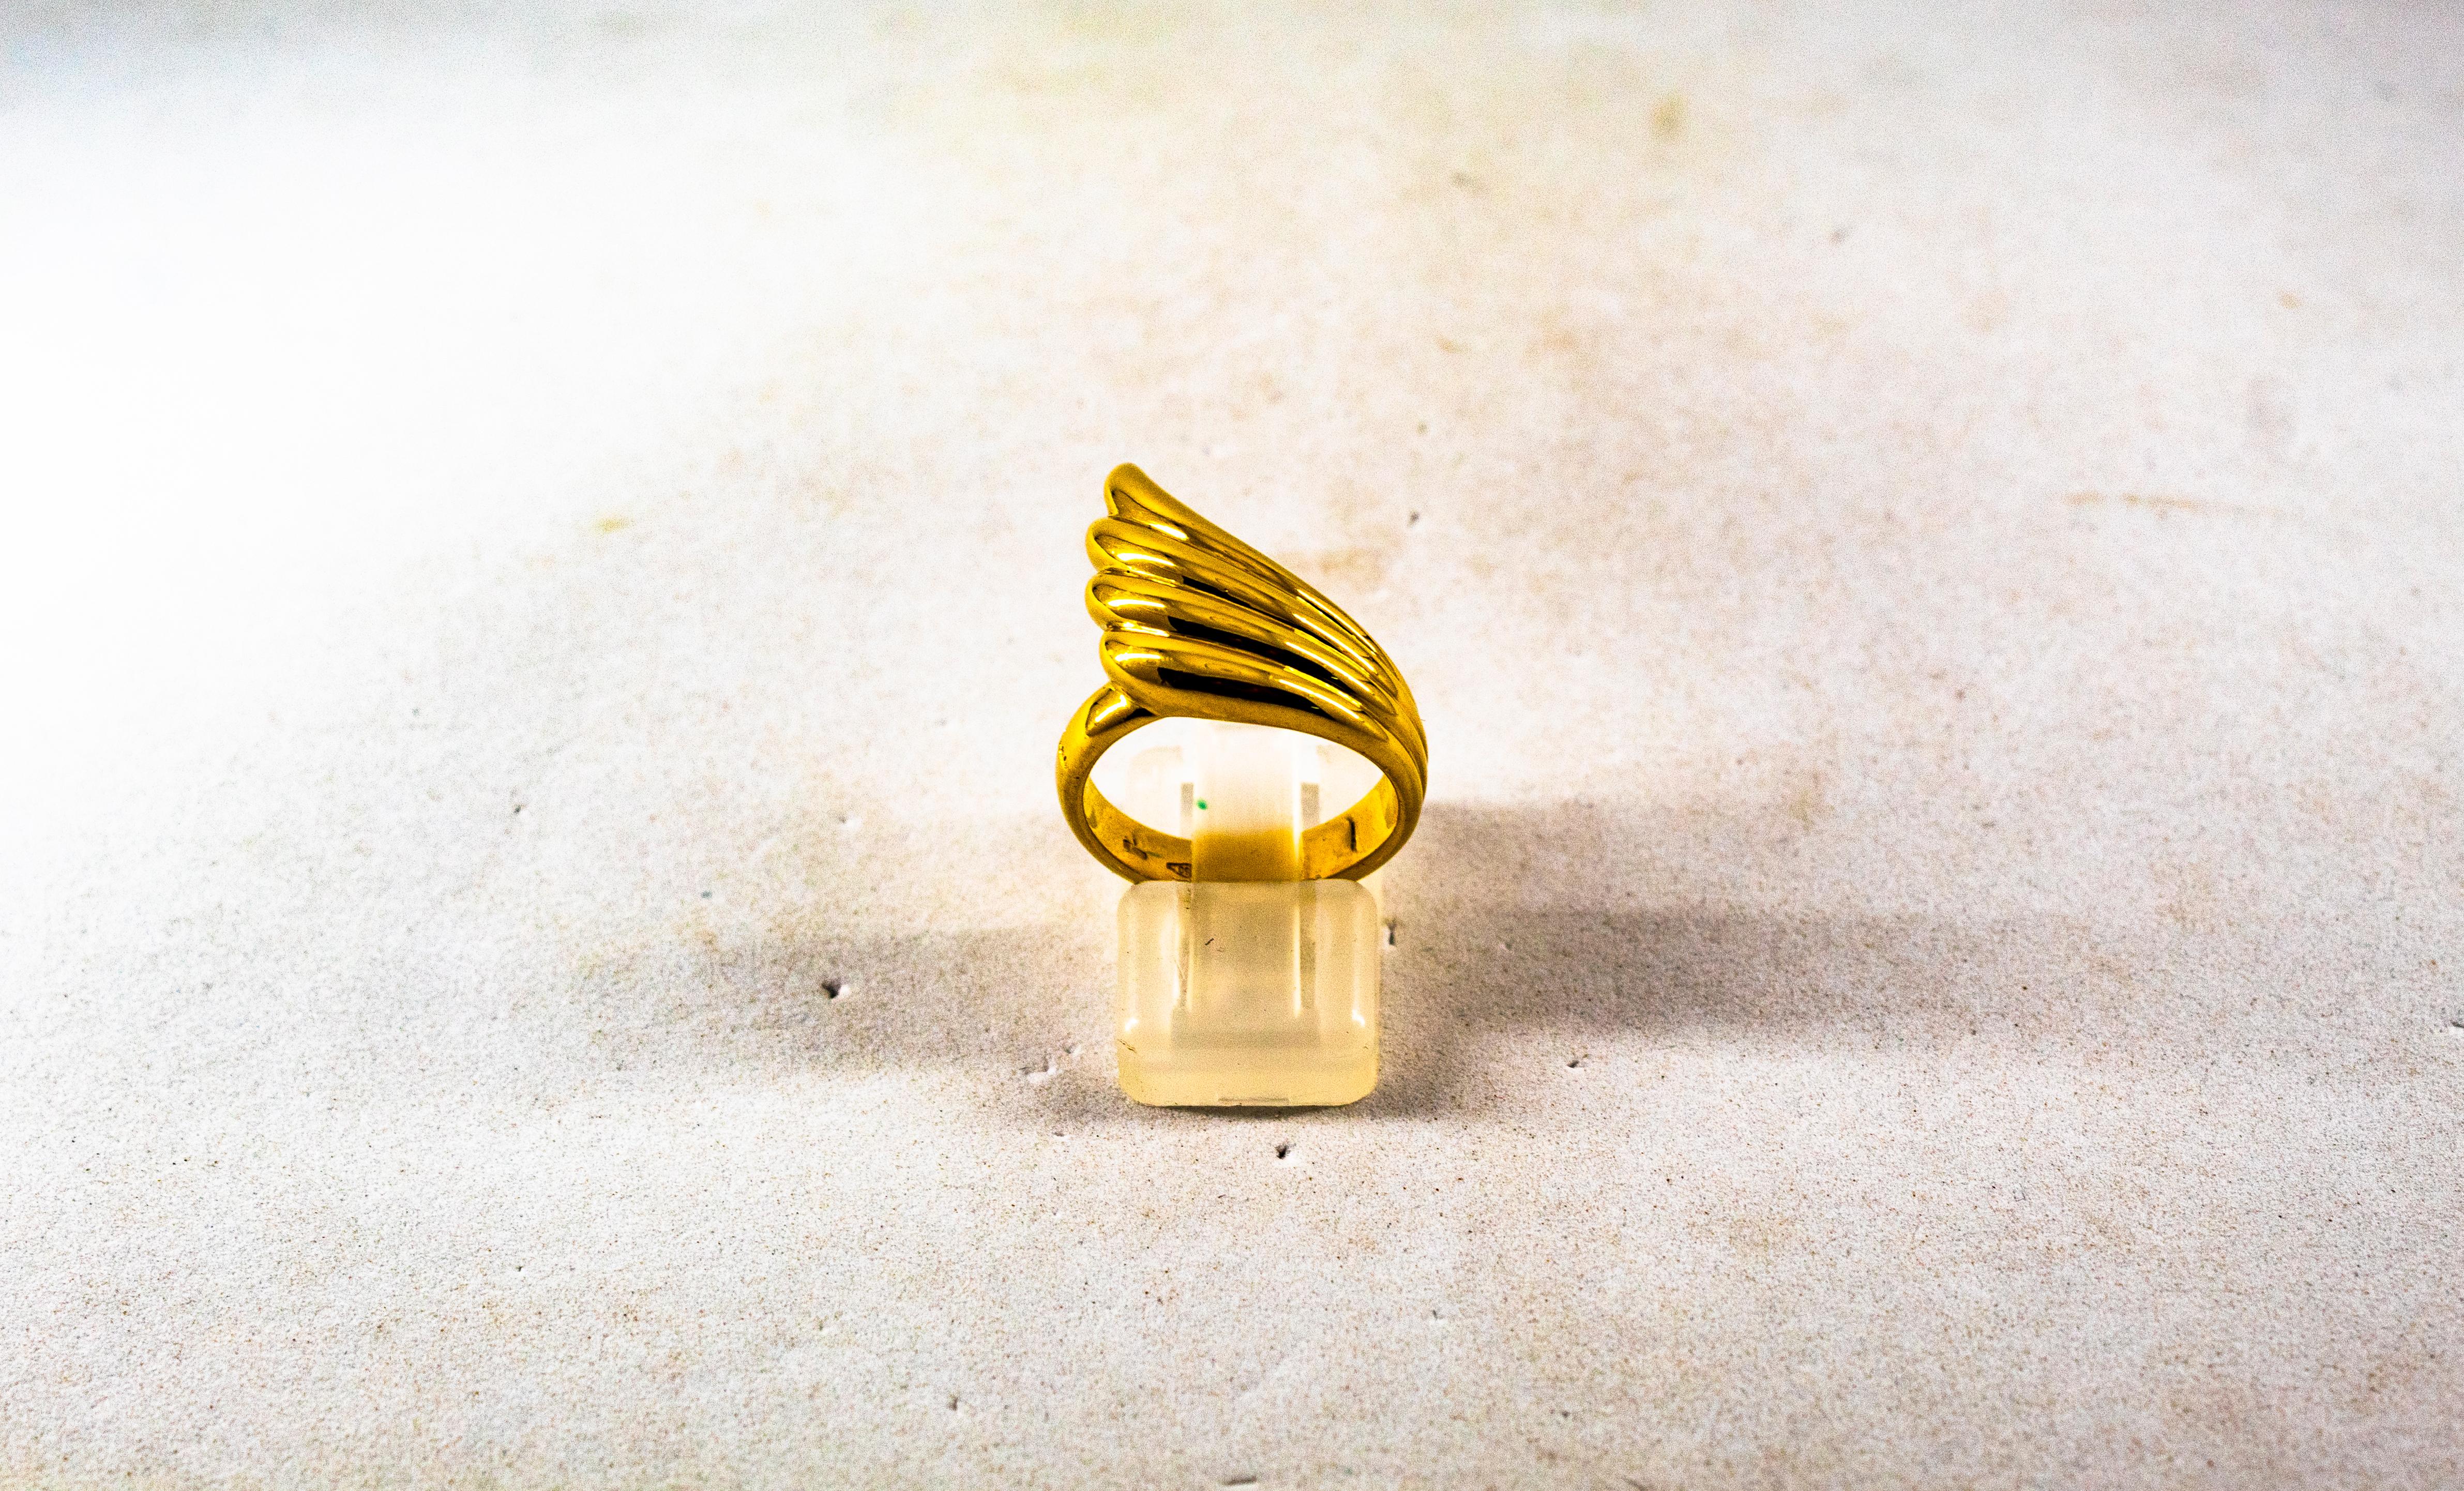 This Ring is made of 18K Yellow Gold.
This Ring has also its matching Earrings.
Size ITA: 14 USA: 7

We're a workshop so every piece is handmade, customizable and resizable.